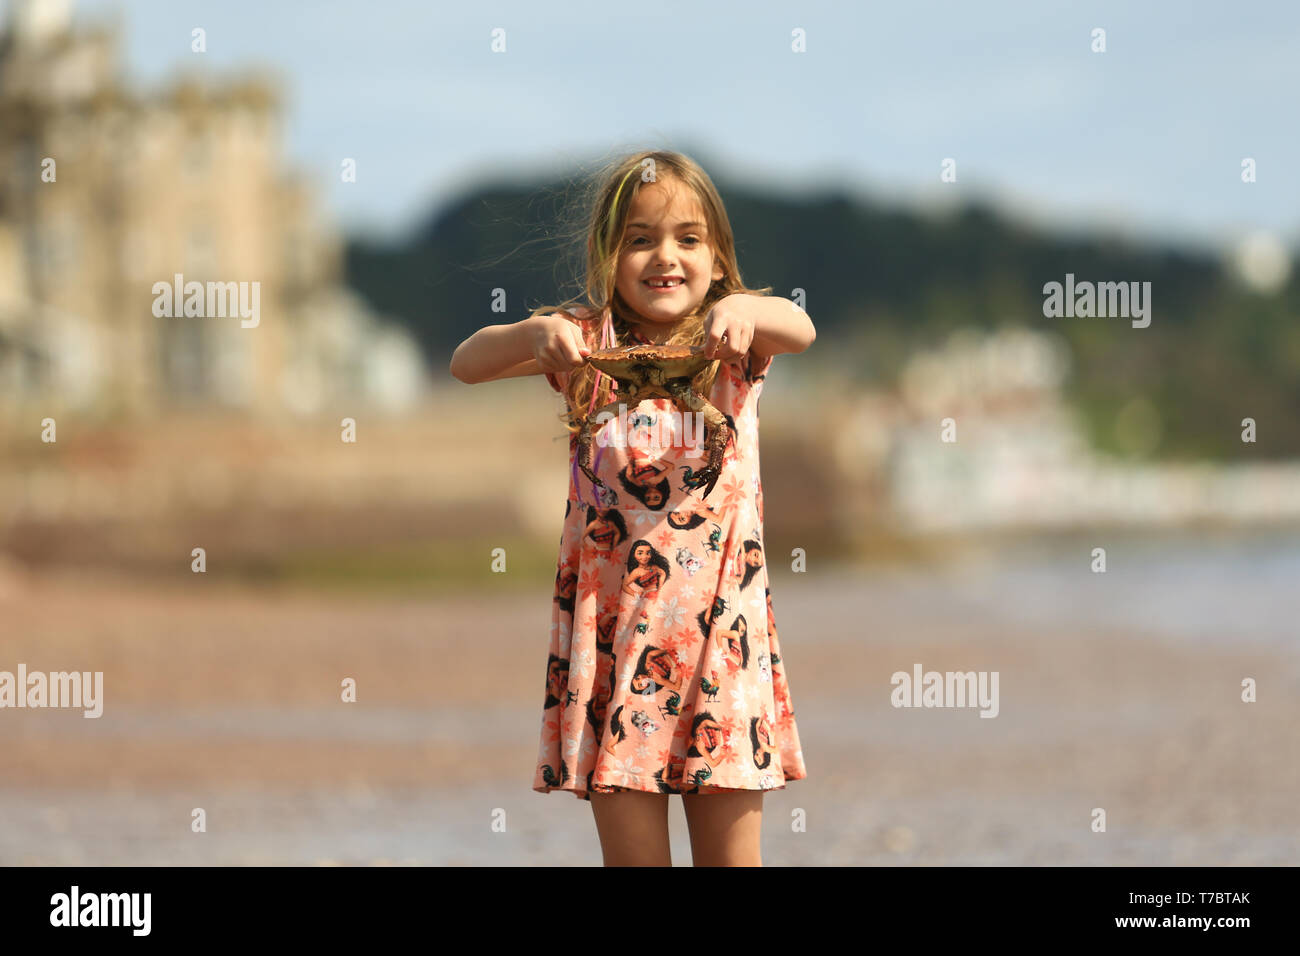 Paignton, Devon, UK. 6th May, 2019. UK Weather: Glorious sunshine at Paignton beach, Devon. Six-year-old Olivia from Bristol proudly shows off a crab she found on Paignton beach. Peter Lopeman/Alamy Live News Stock Photo